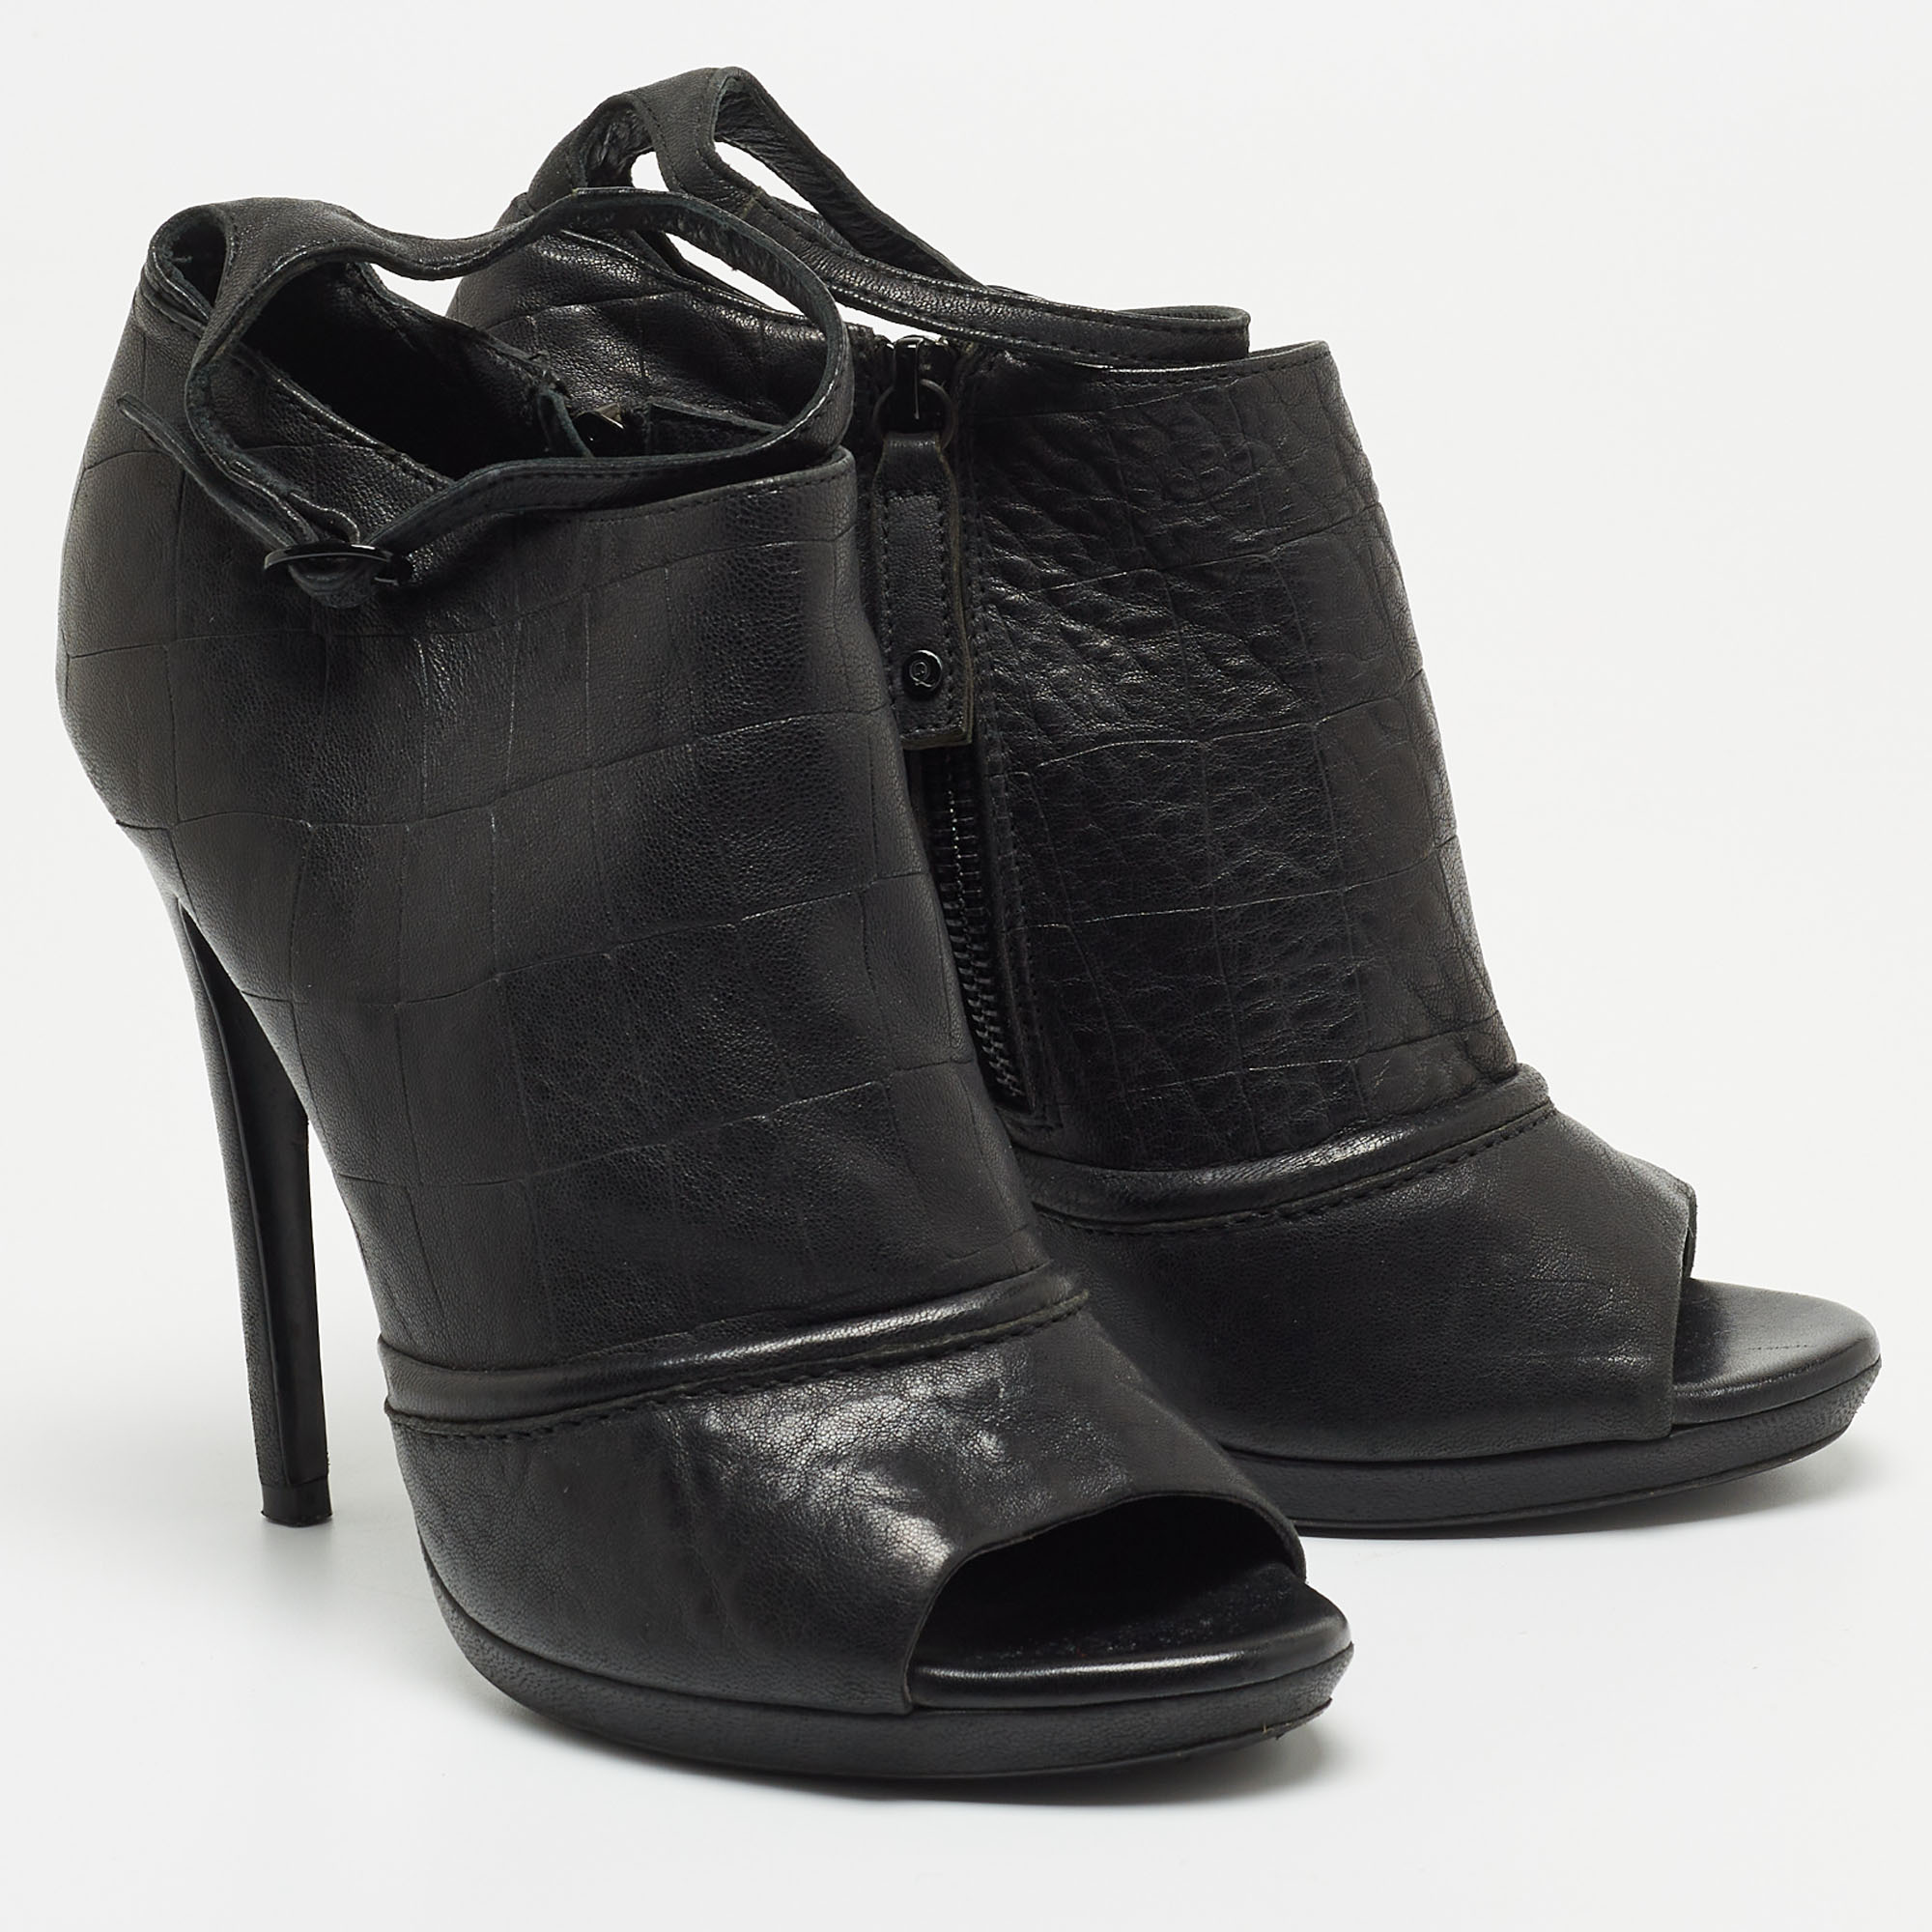 McQ By Alexander McQueen Black Croc Embossed Leather Peep Toe Ankle Strap Booties Size 40